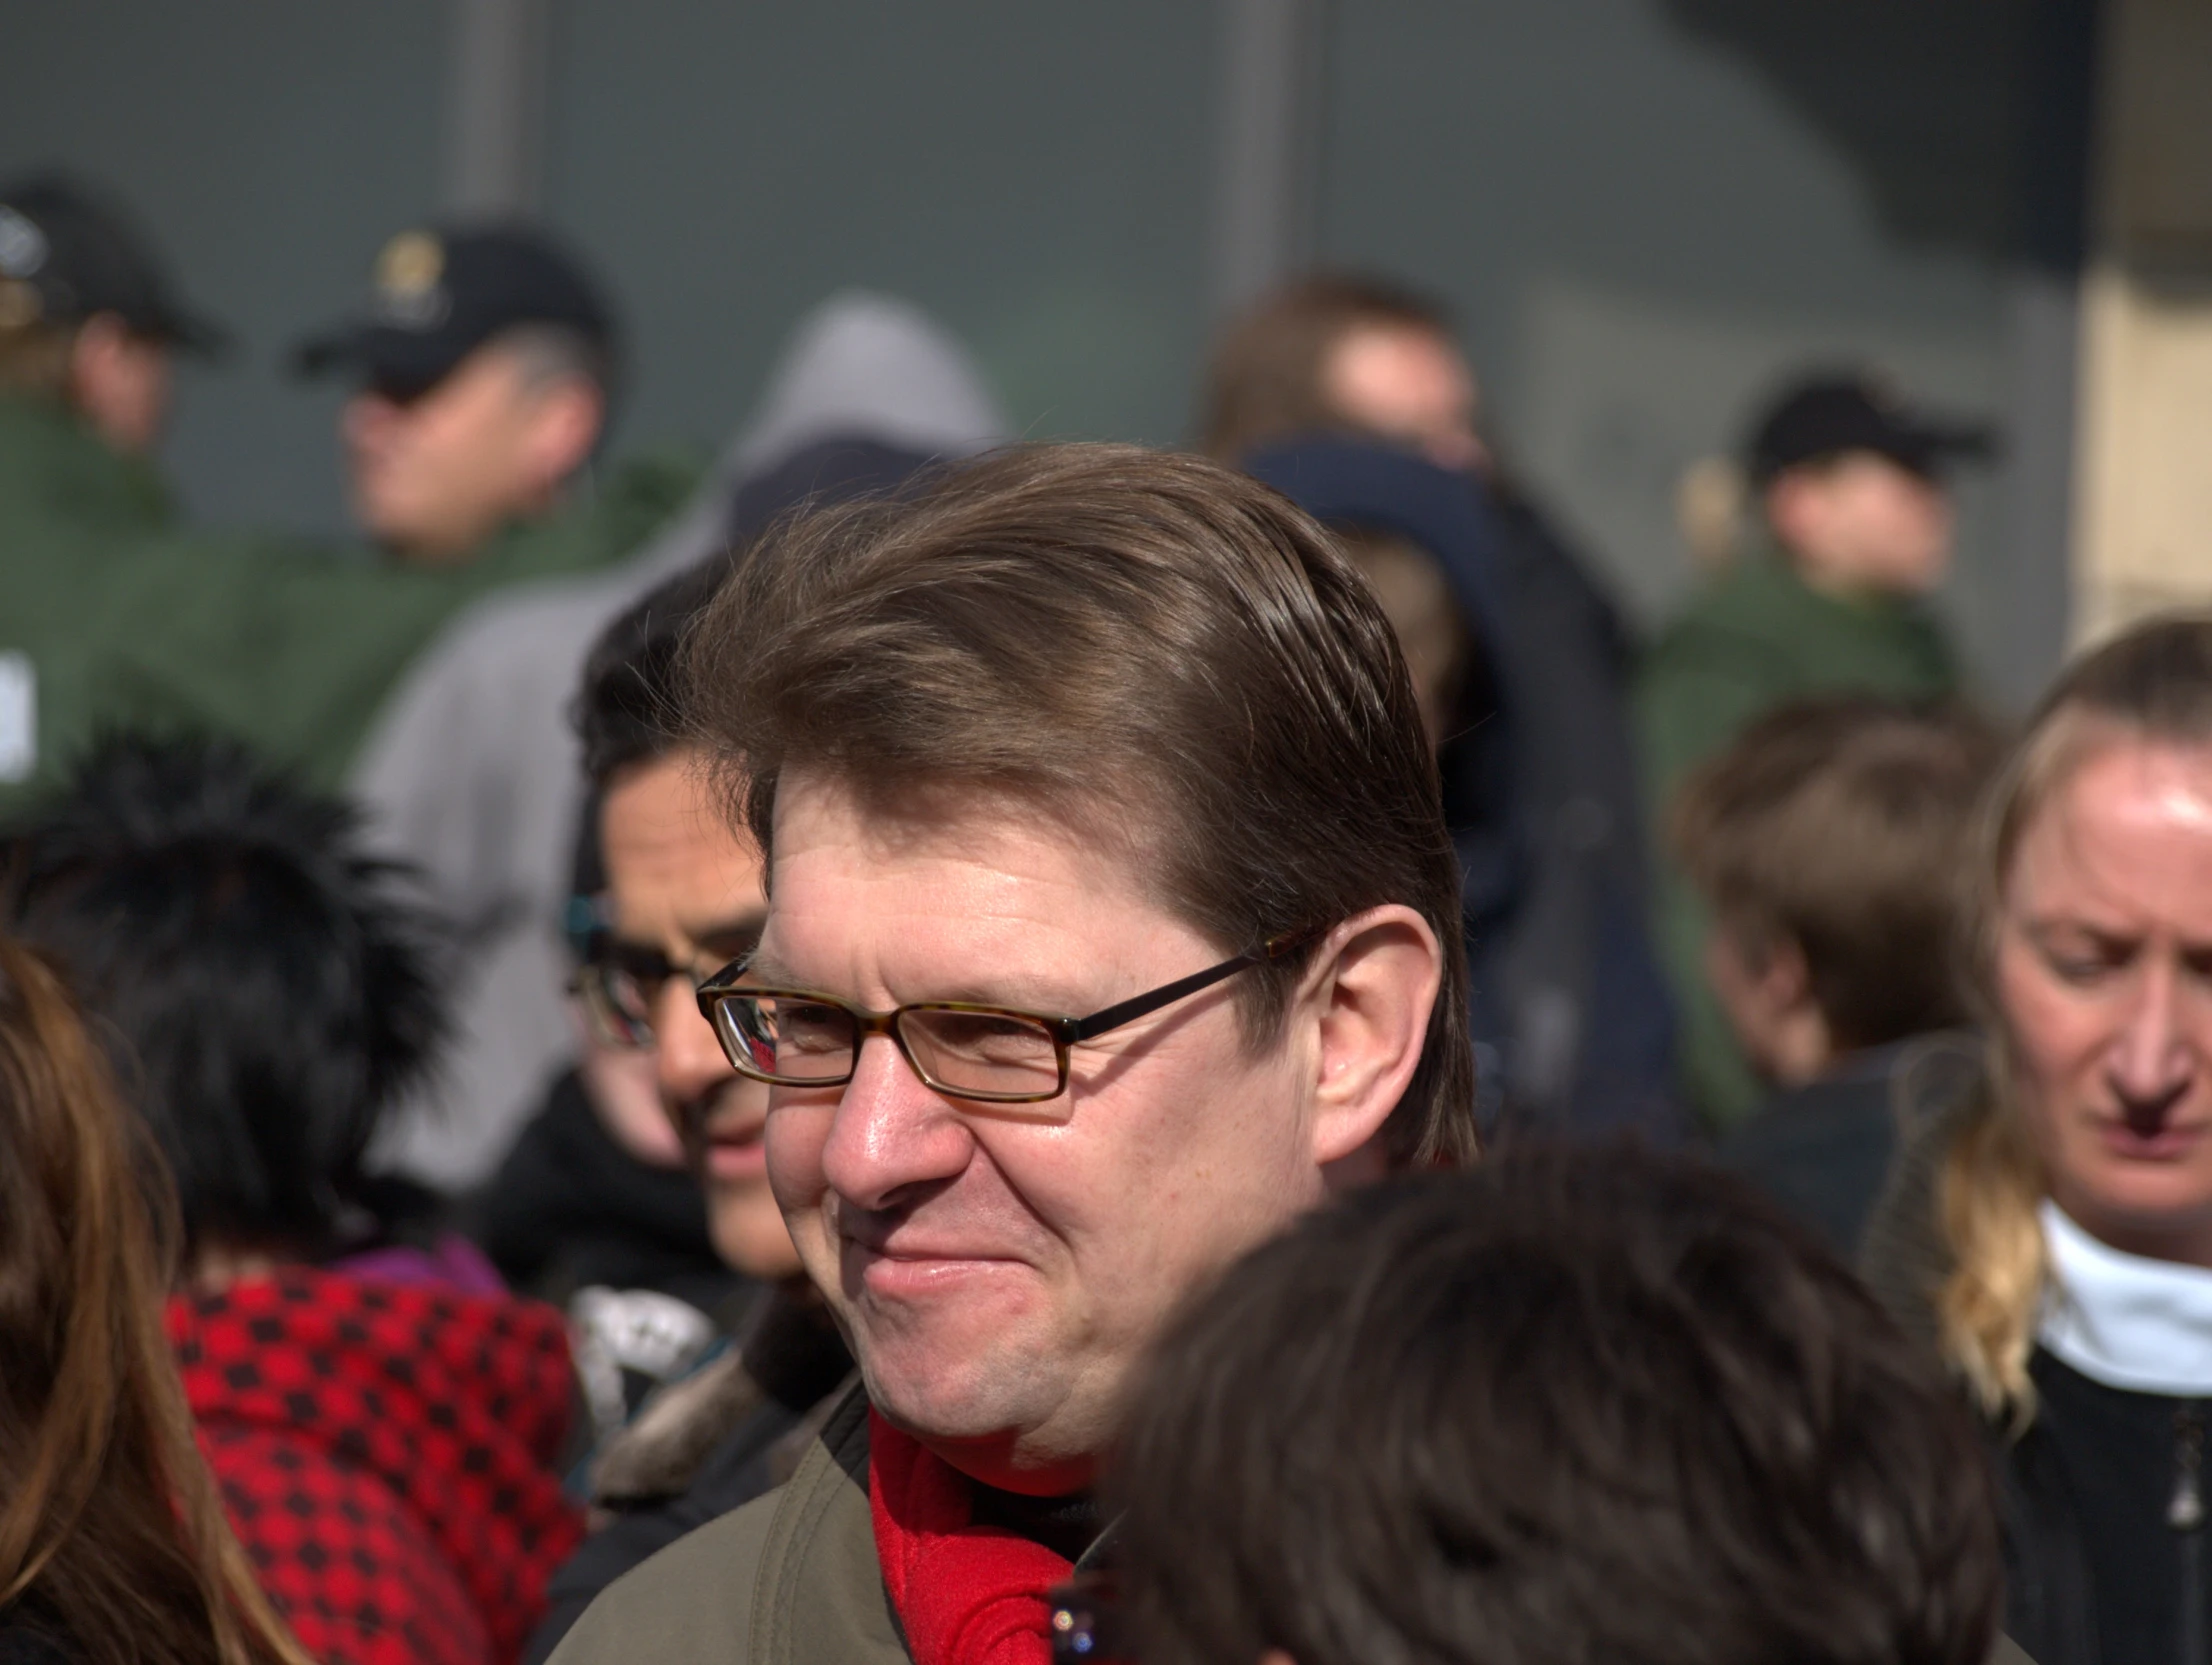 a man with glasses and a suit standing in front of some people